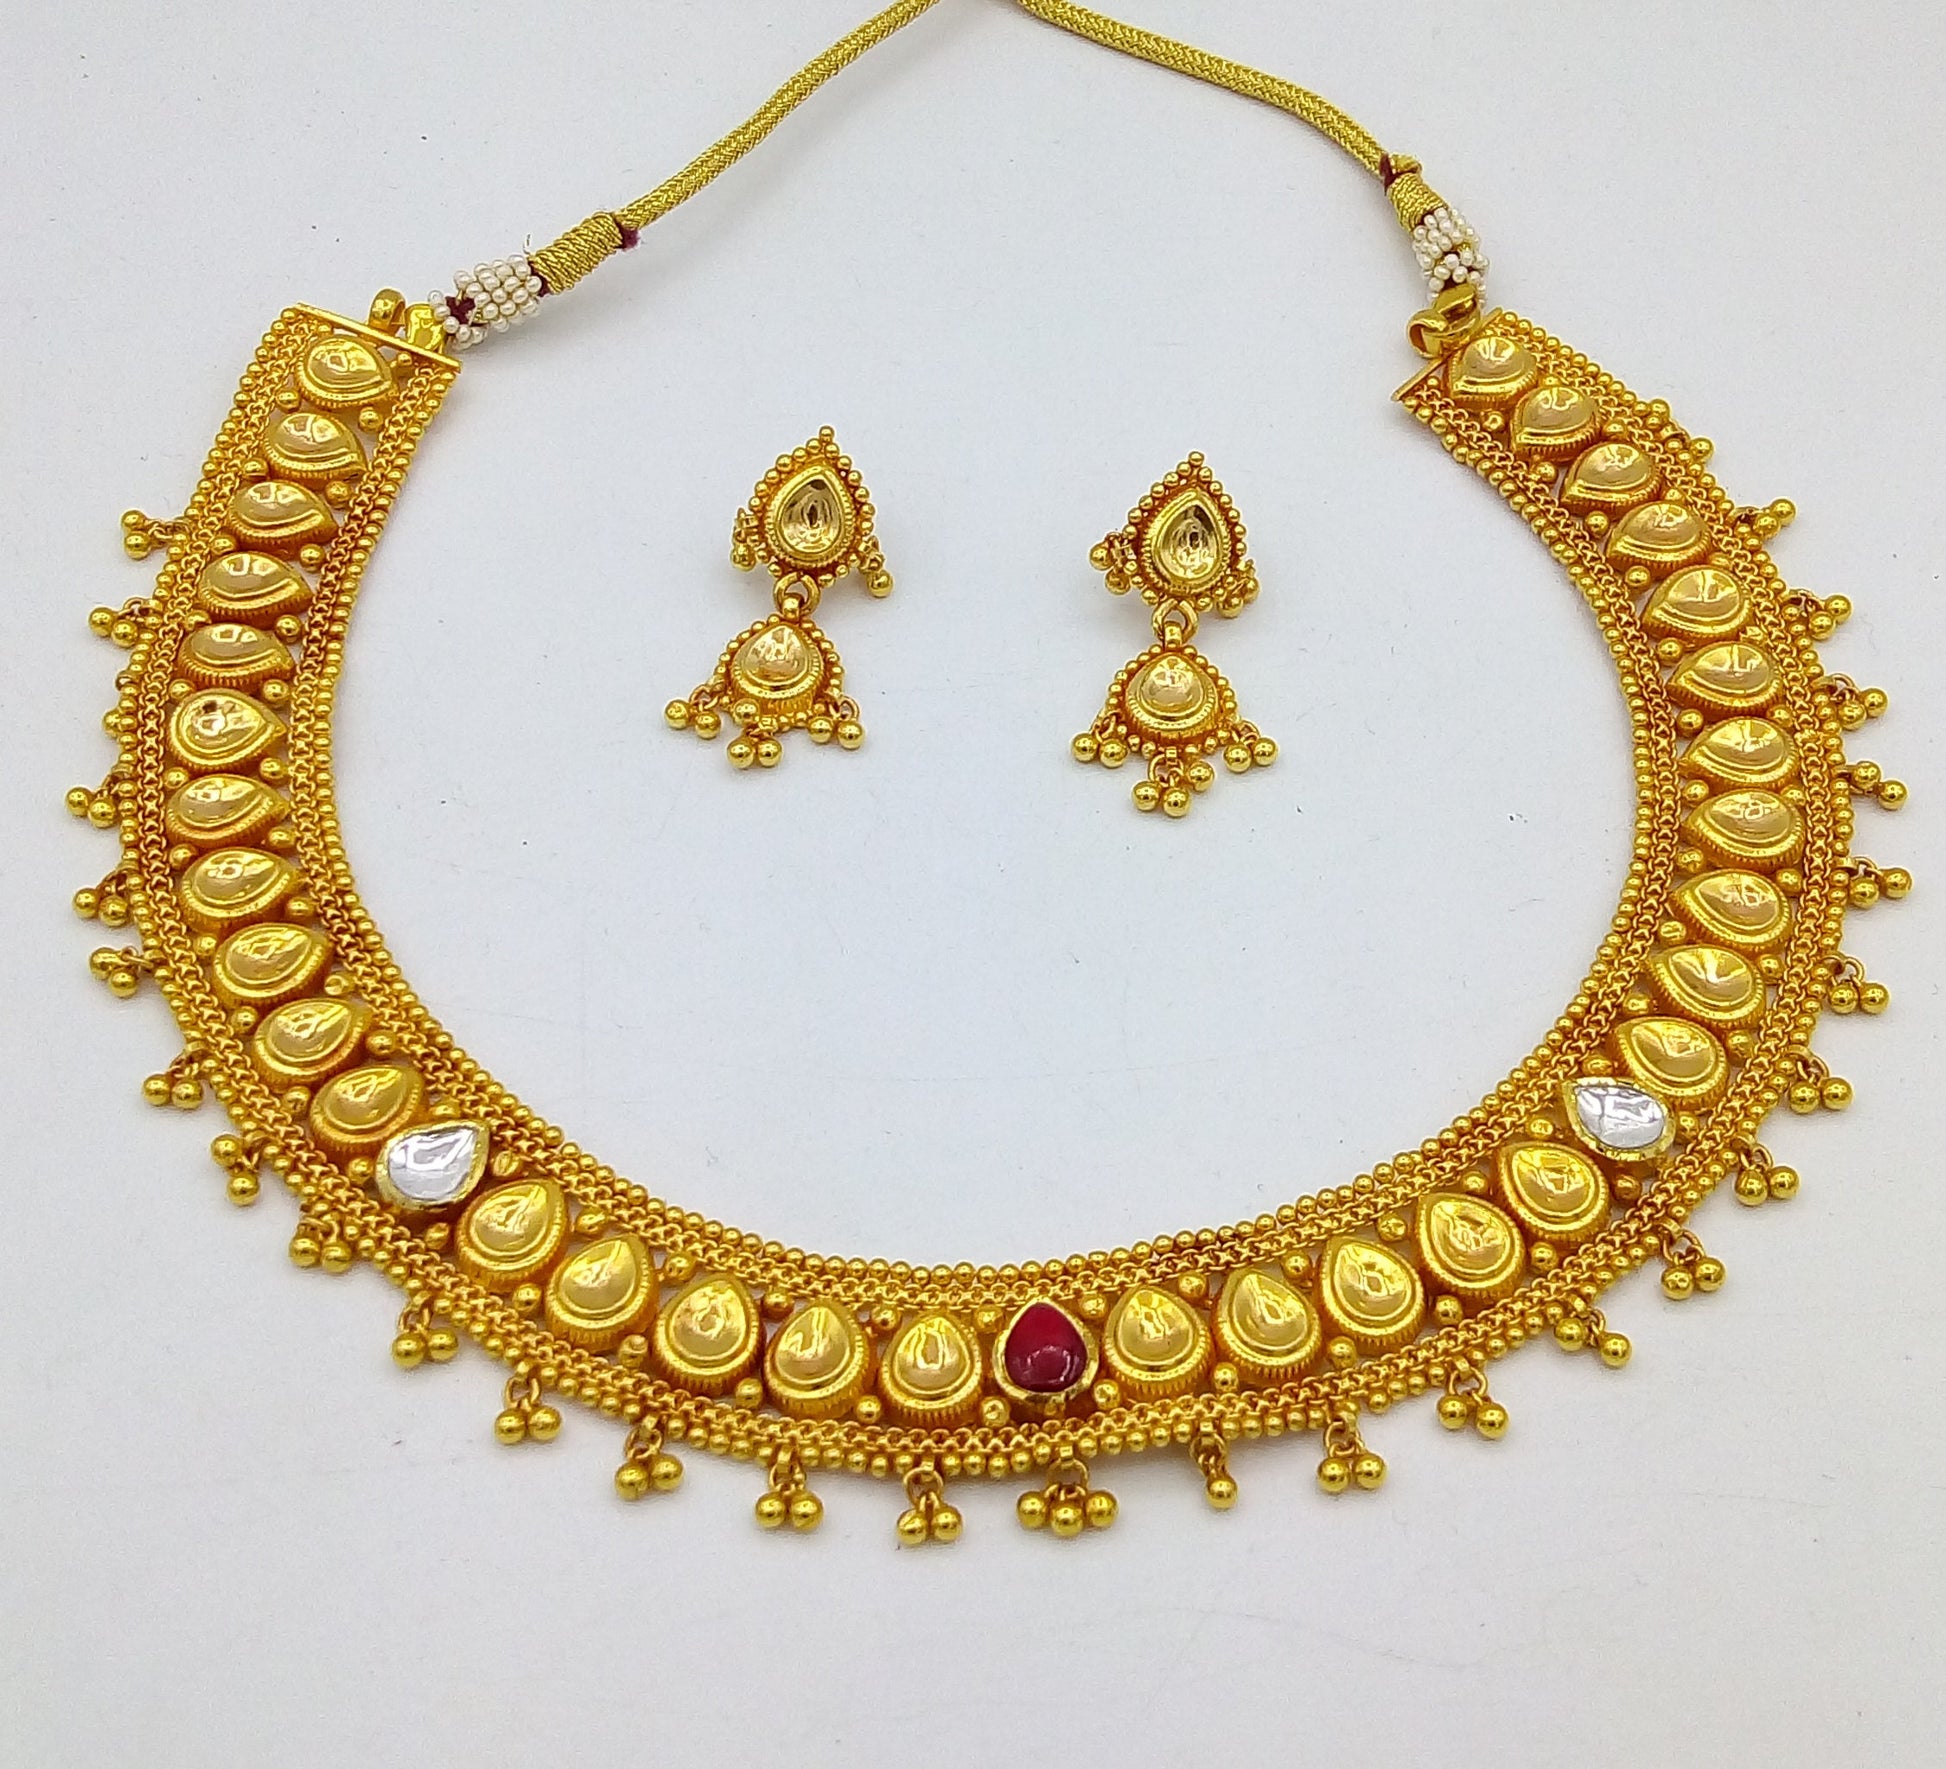 Traditional Tussi style vintage antique handmade 22 karat yellow gold fabulous wedding tribal necklace set for women's wedding jewelry - TRIBAL ORNAMENTS